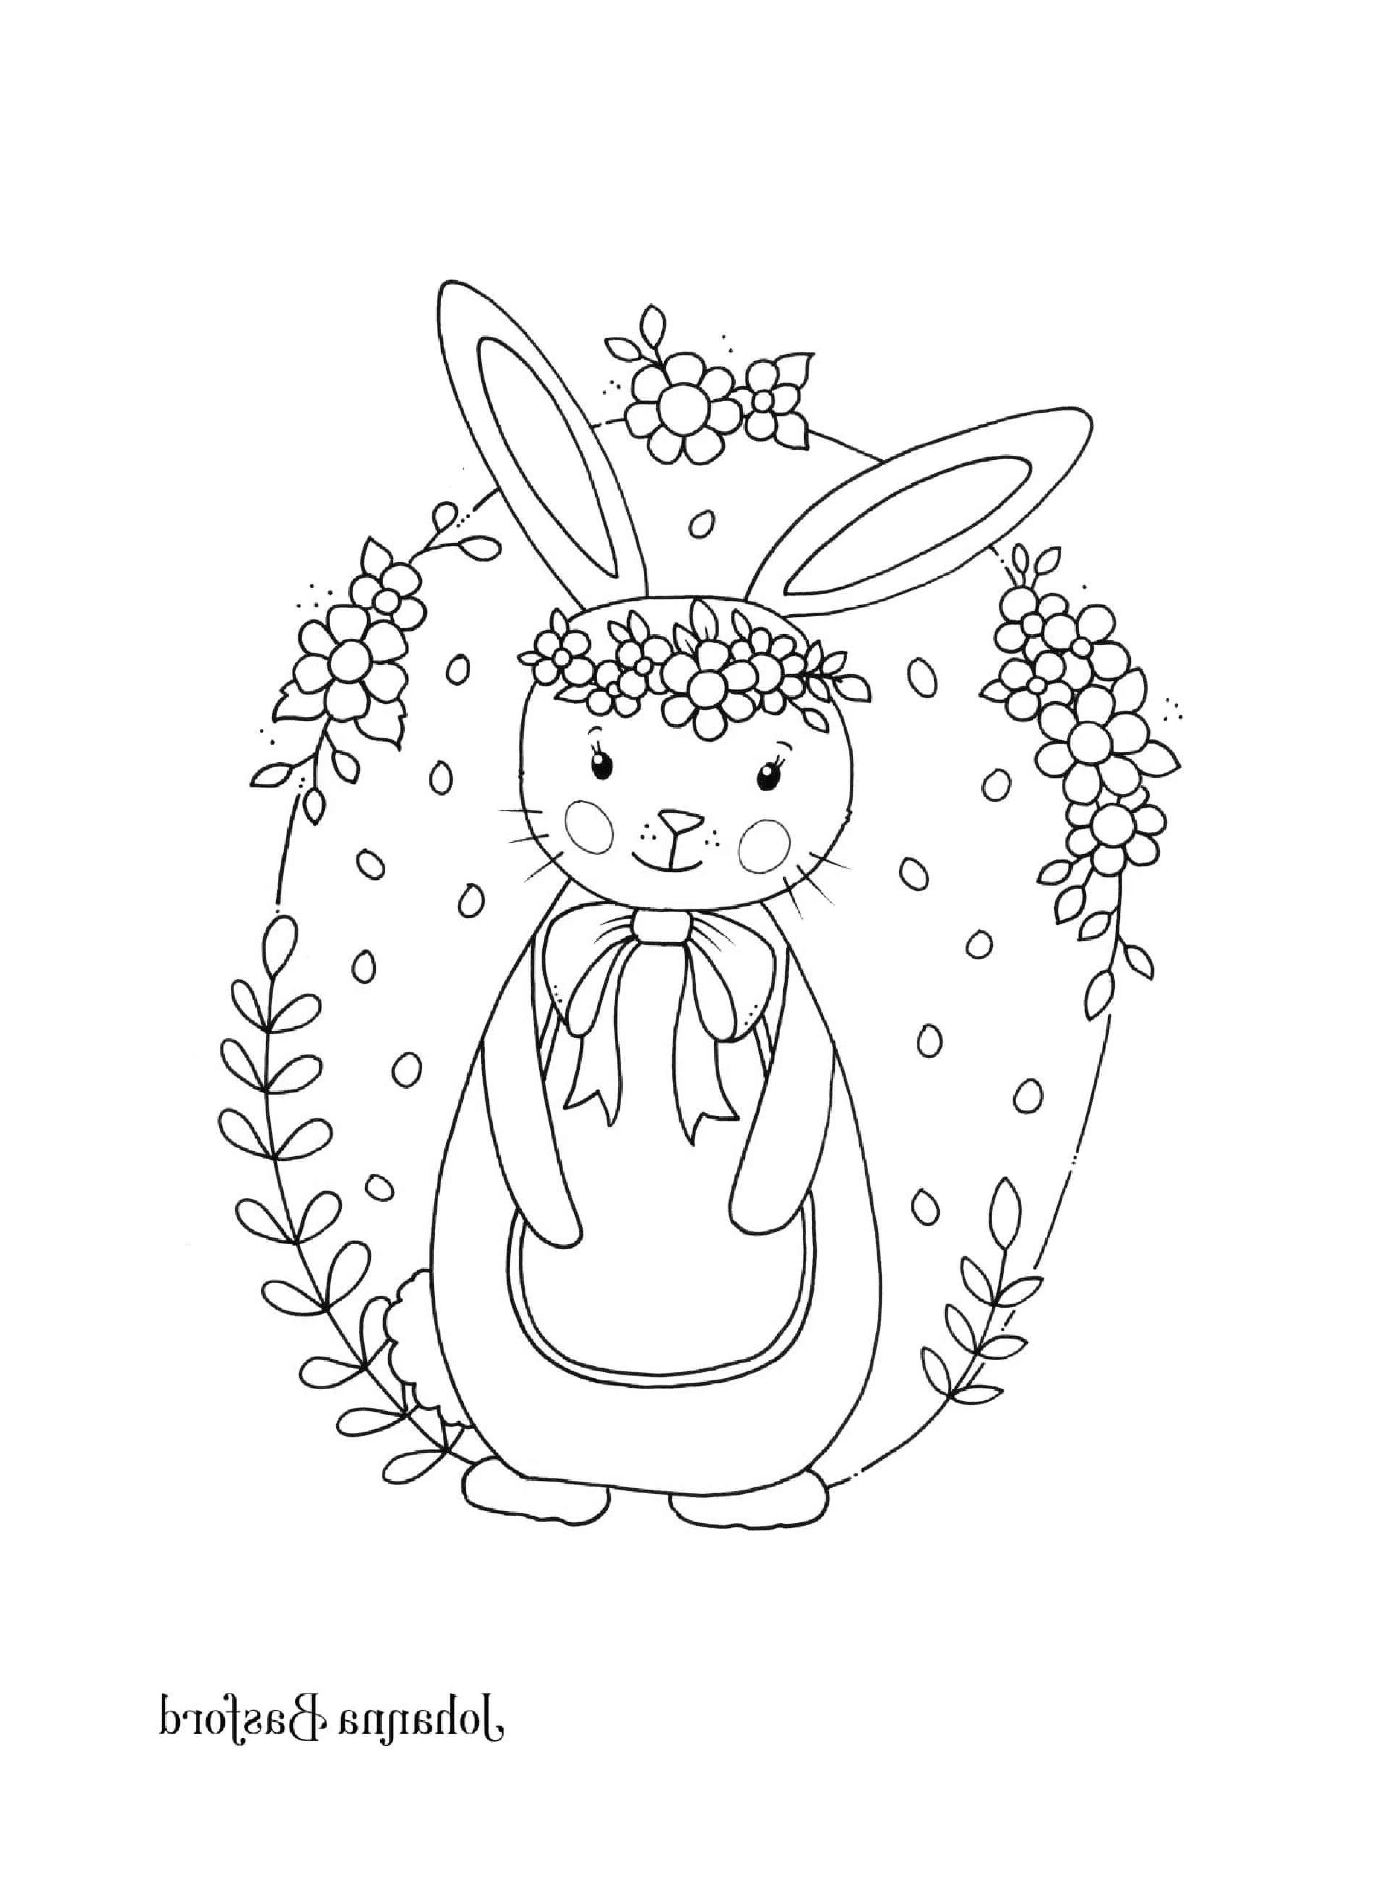  A rabbit with a crown of flowers 